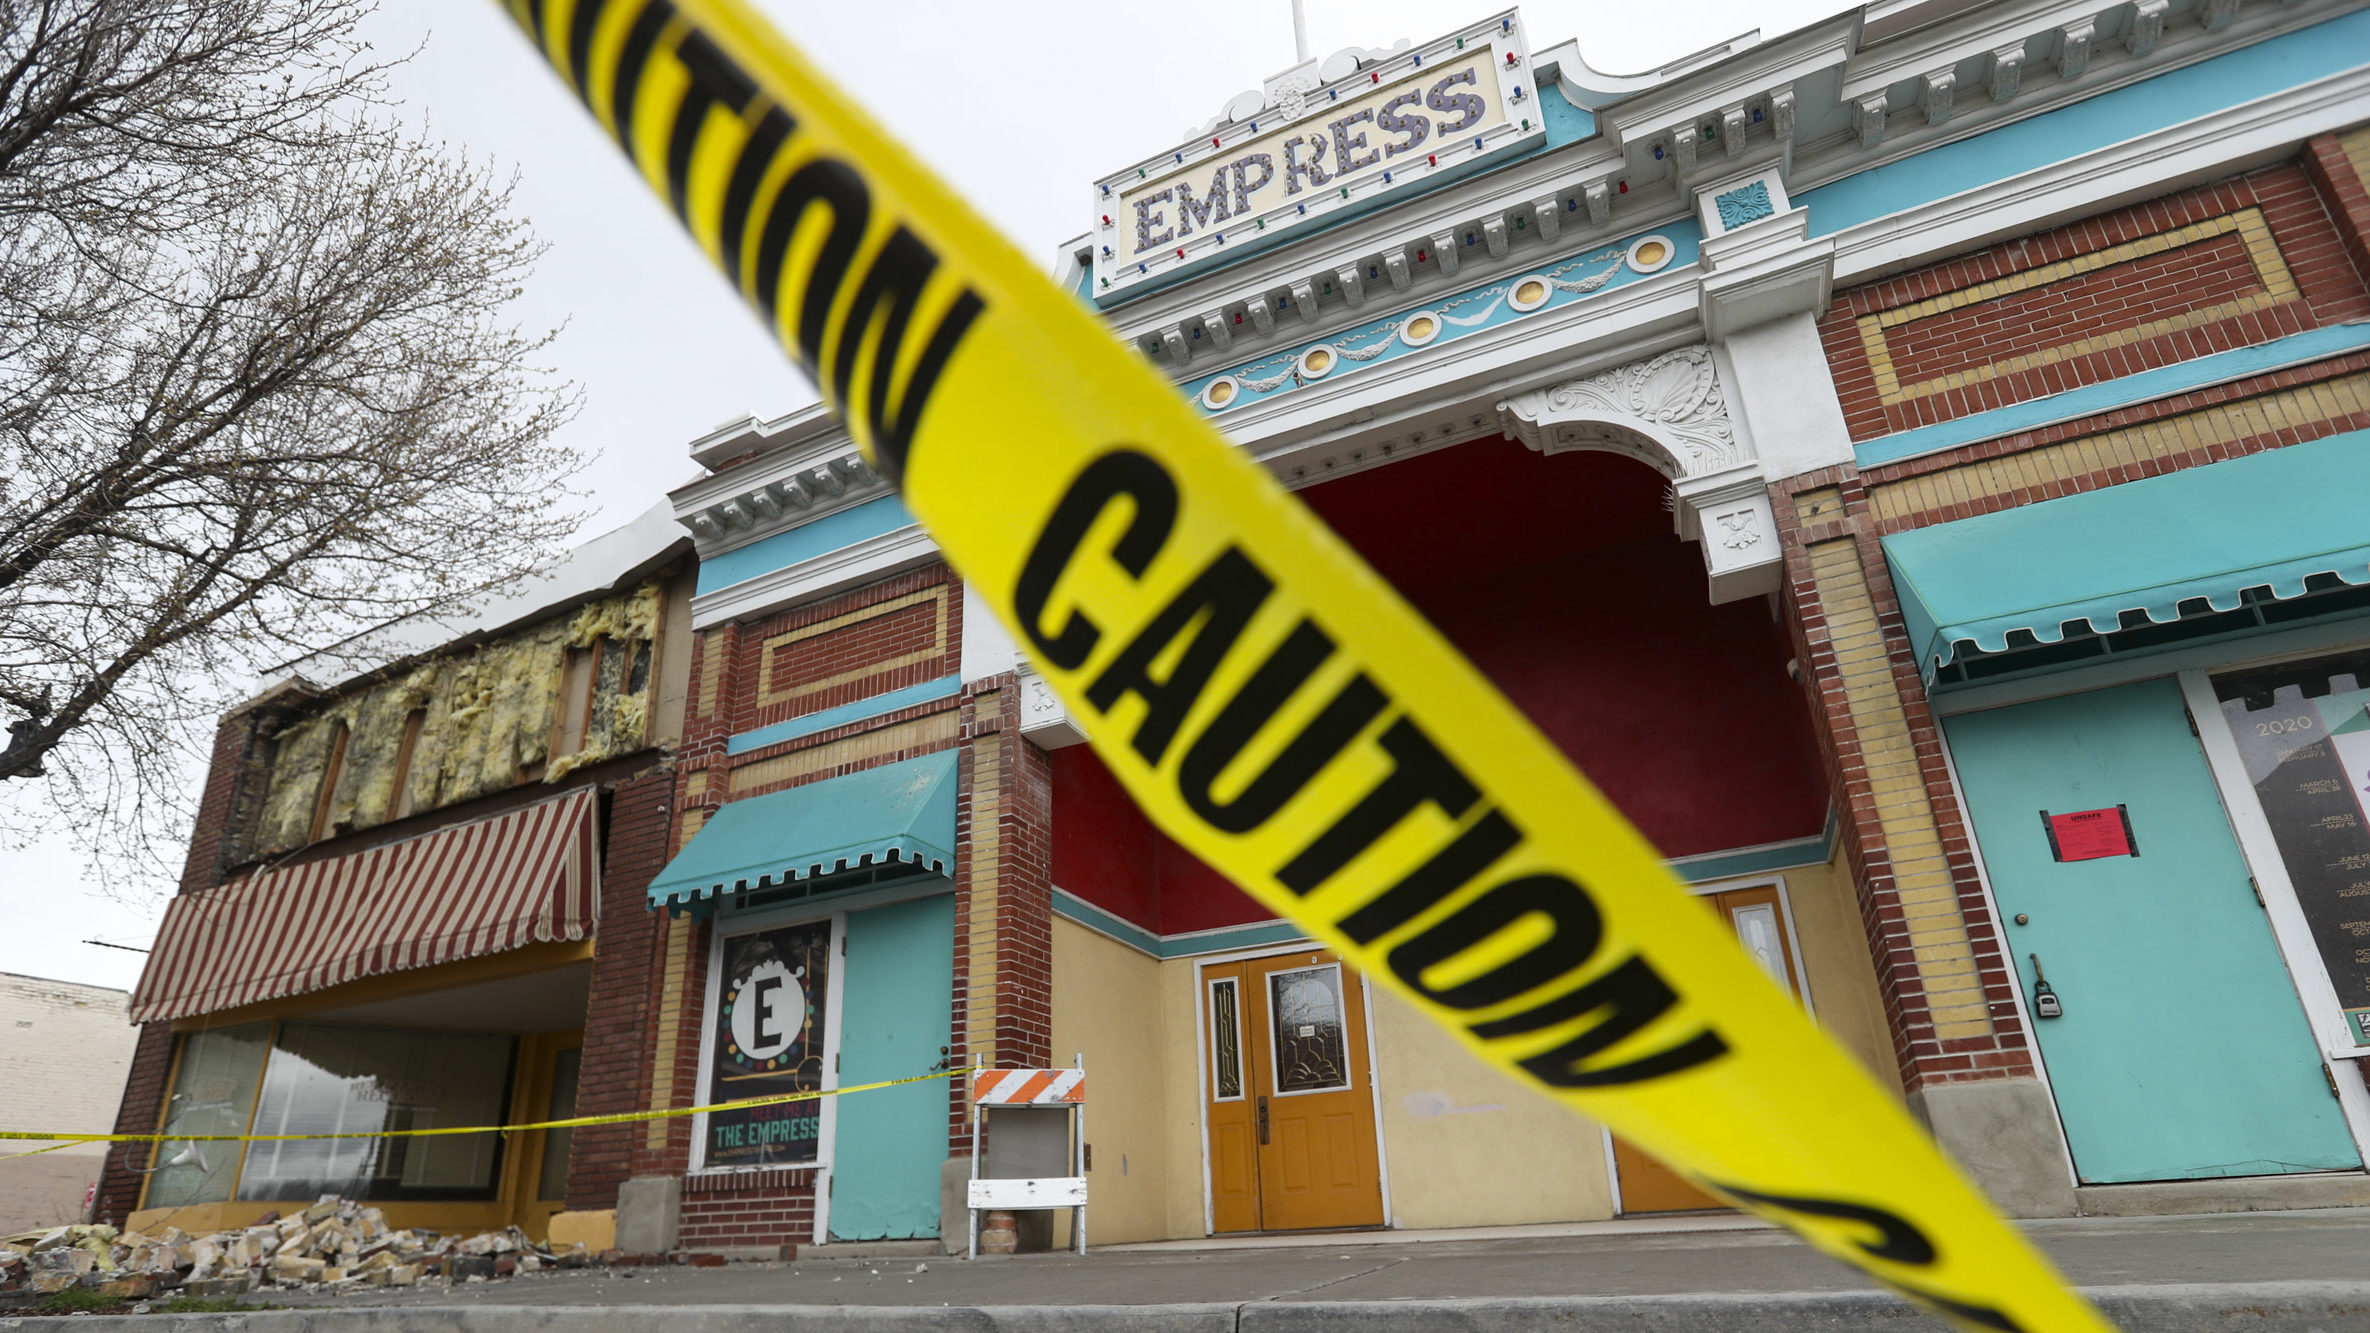 caution tape in front of main street after earthquake,...